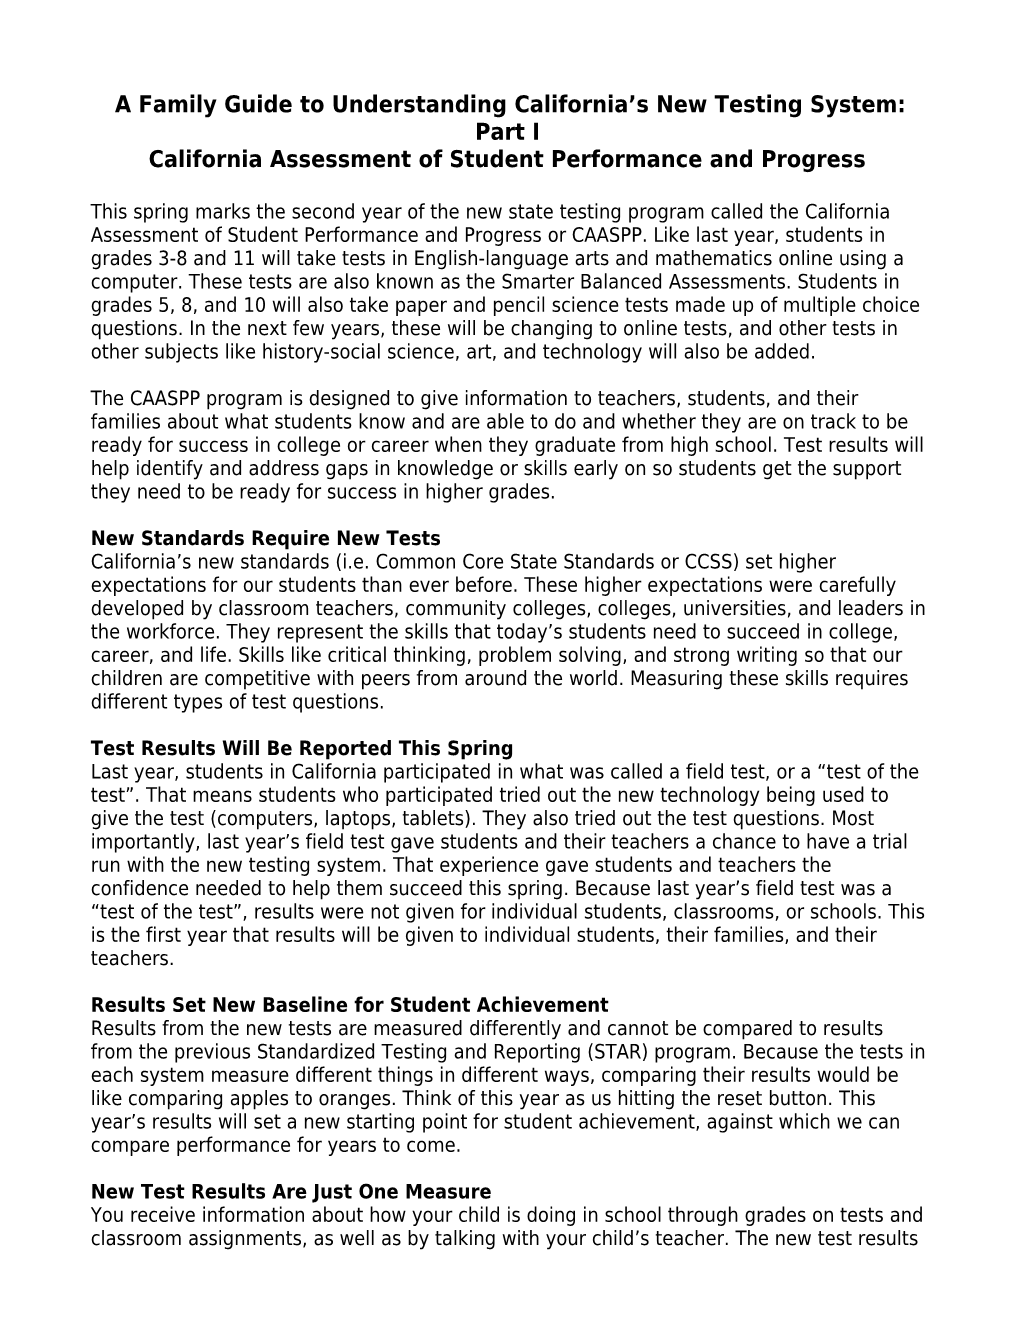 A Family Guide to Understanding California S New Testing System: Part I